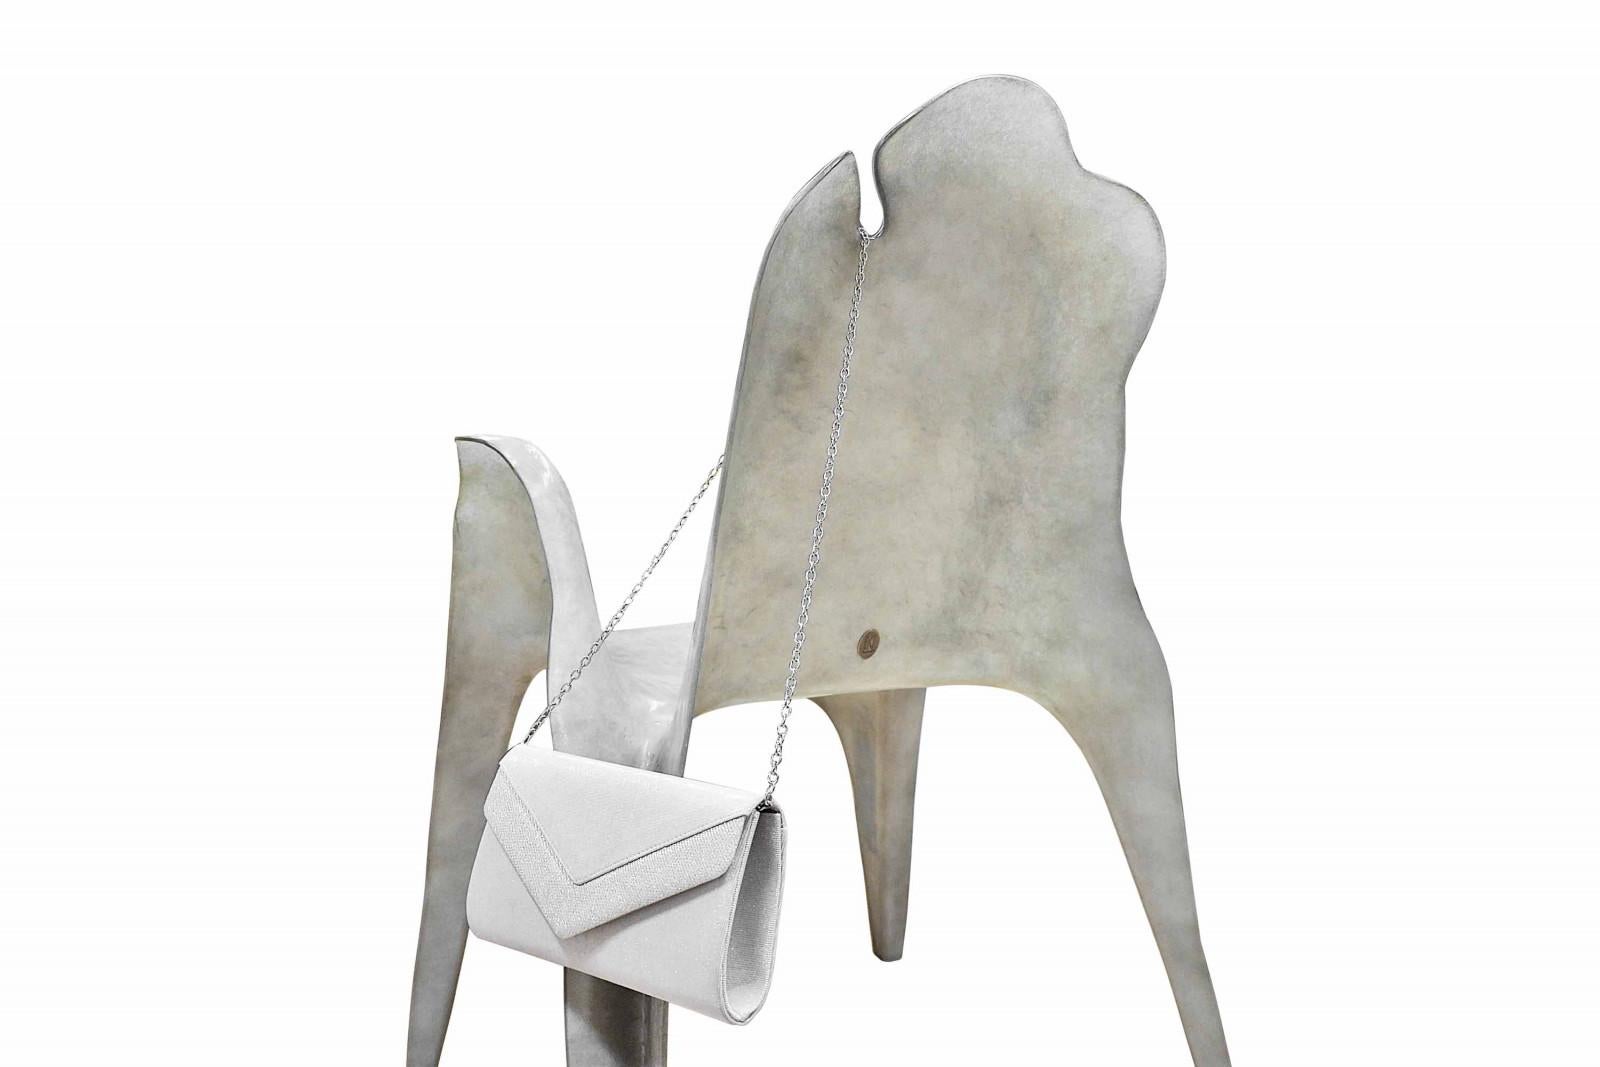 Portuguese Organically Shaped Outdoor Dining Chairs in Matte White For Sale